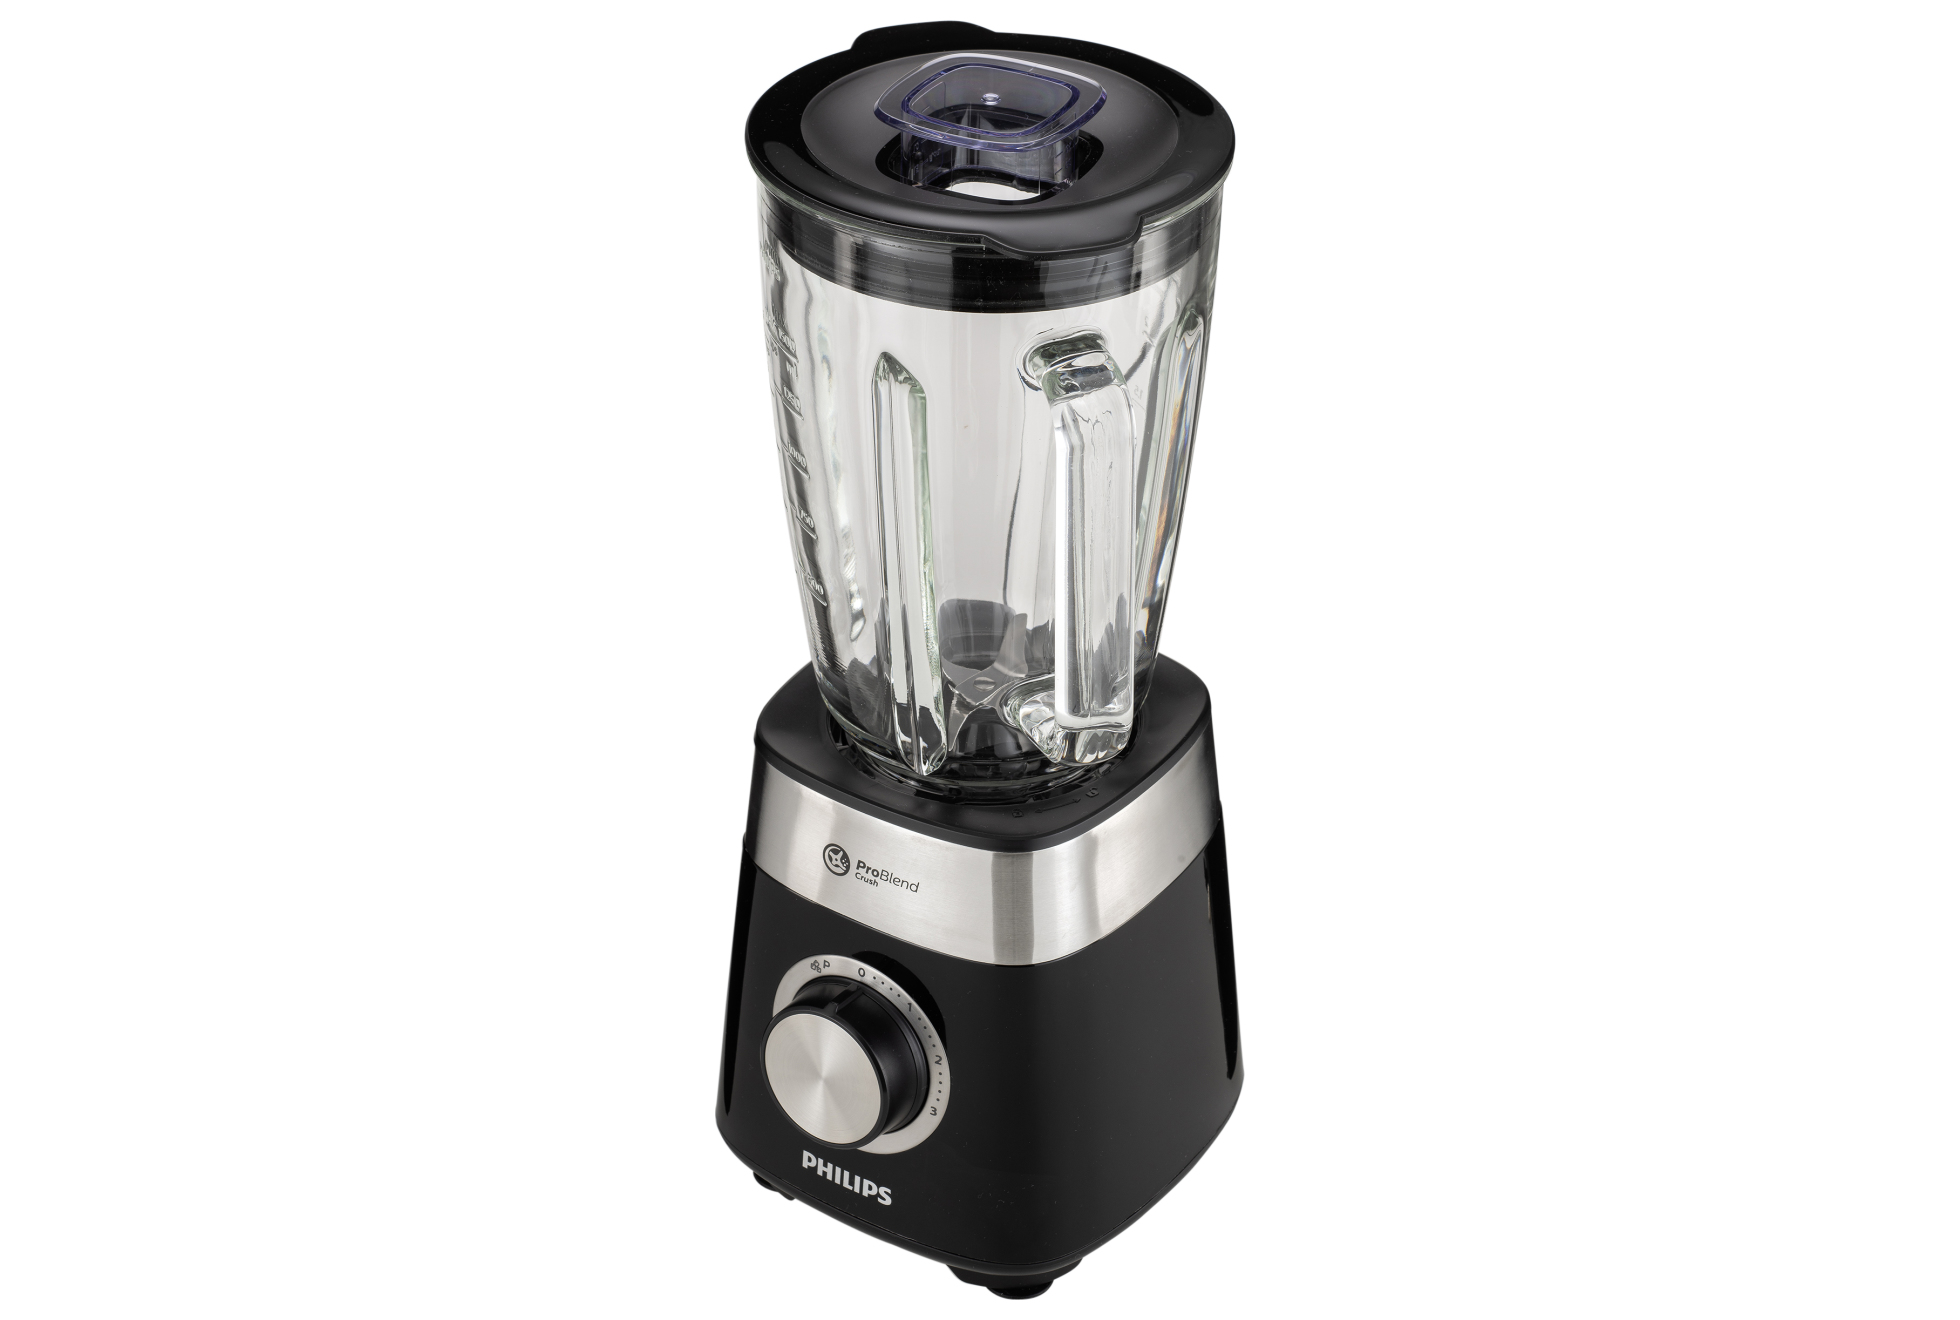 Philips Series 5000 Blender With Glass Jar, HR2228/90 - TV Sales & Home